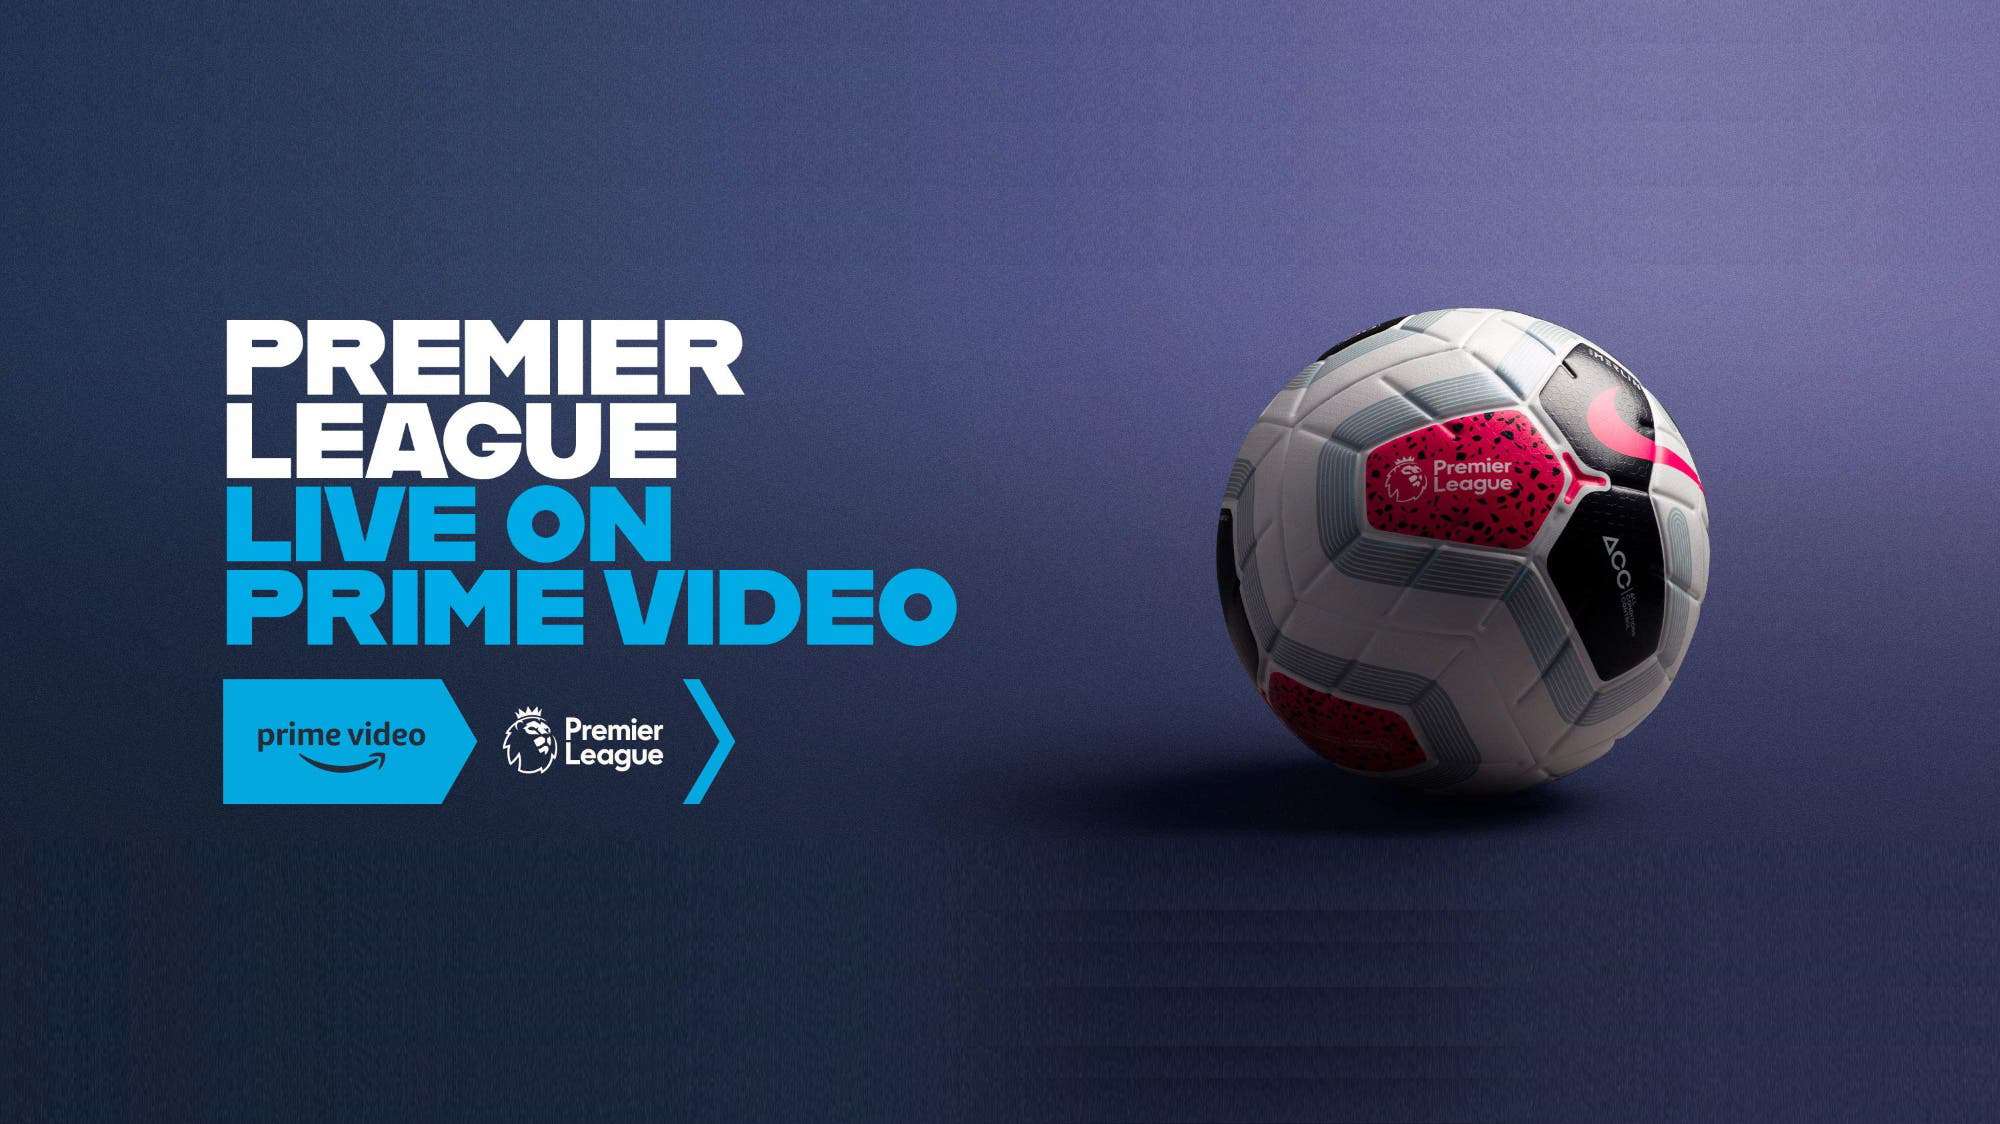 Amazon Prime Video to live stream Premier League for free in the UK